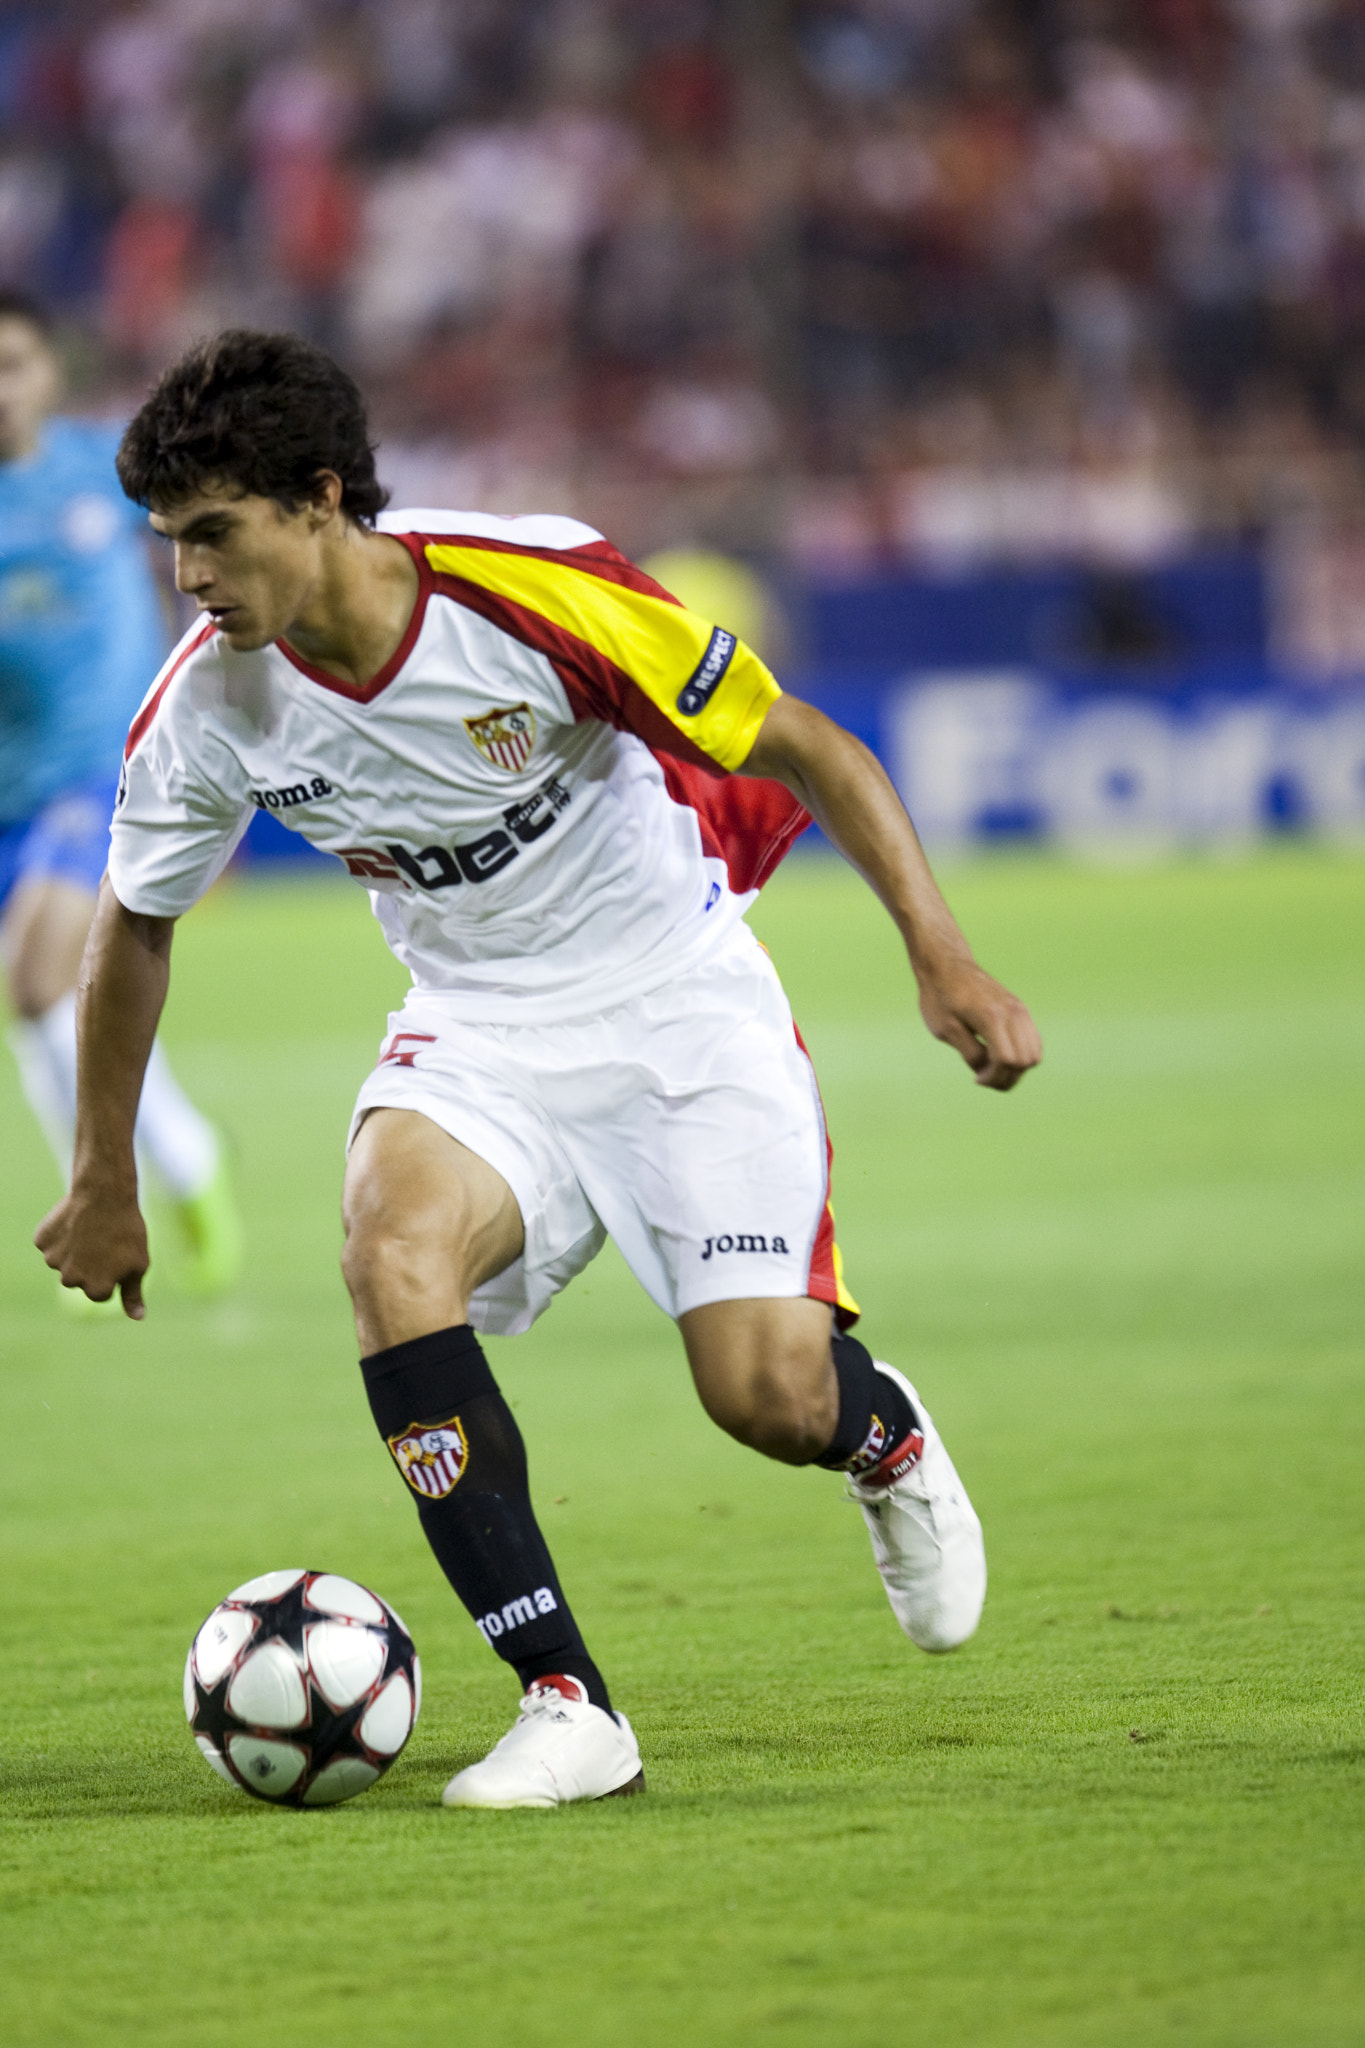 Diego Perotti with the ball. Taken during the UEFA Champions League game between Sevilla FC and FC U